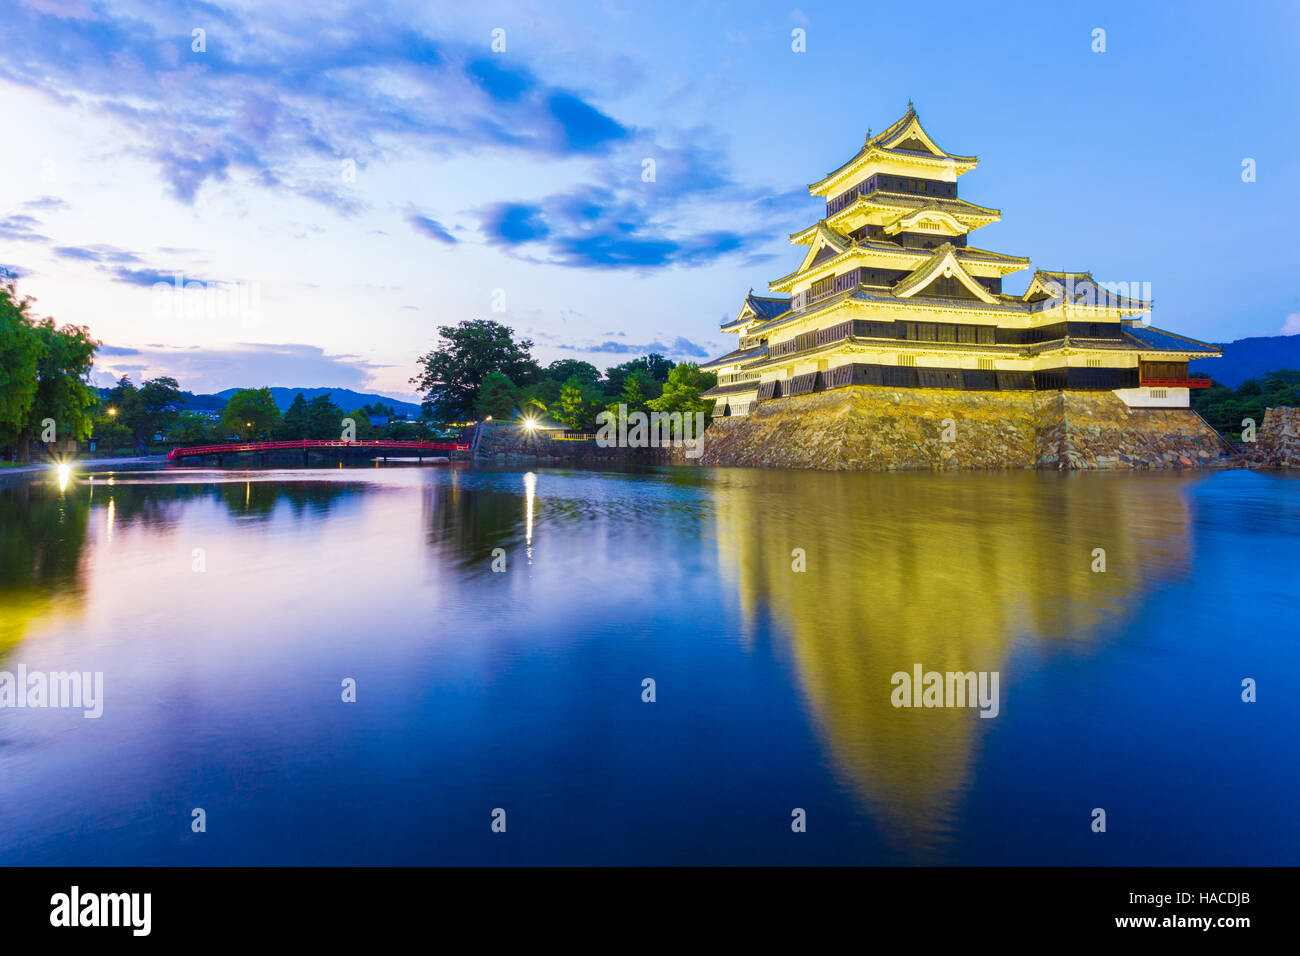 Matsumoto Castle beautifully illuminated at night blue hour with long exposure reflection in moat water in Japan Stock Photo